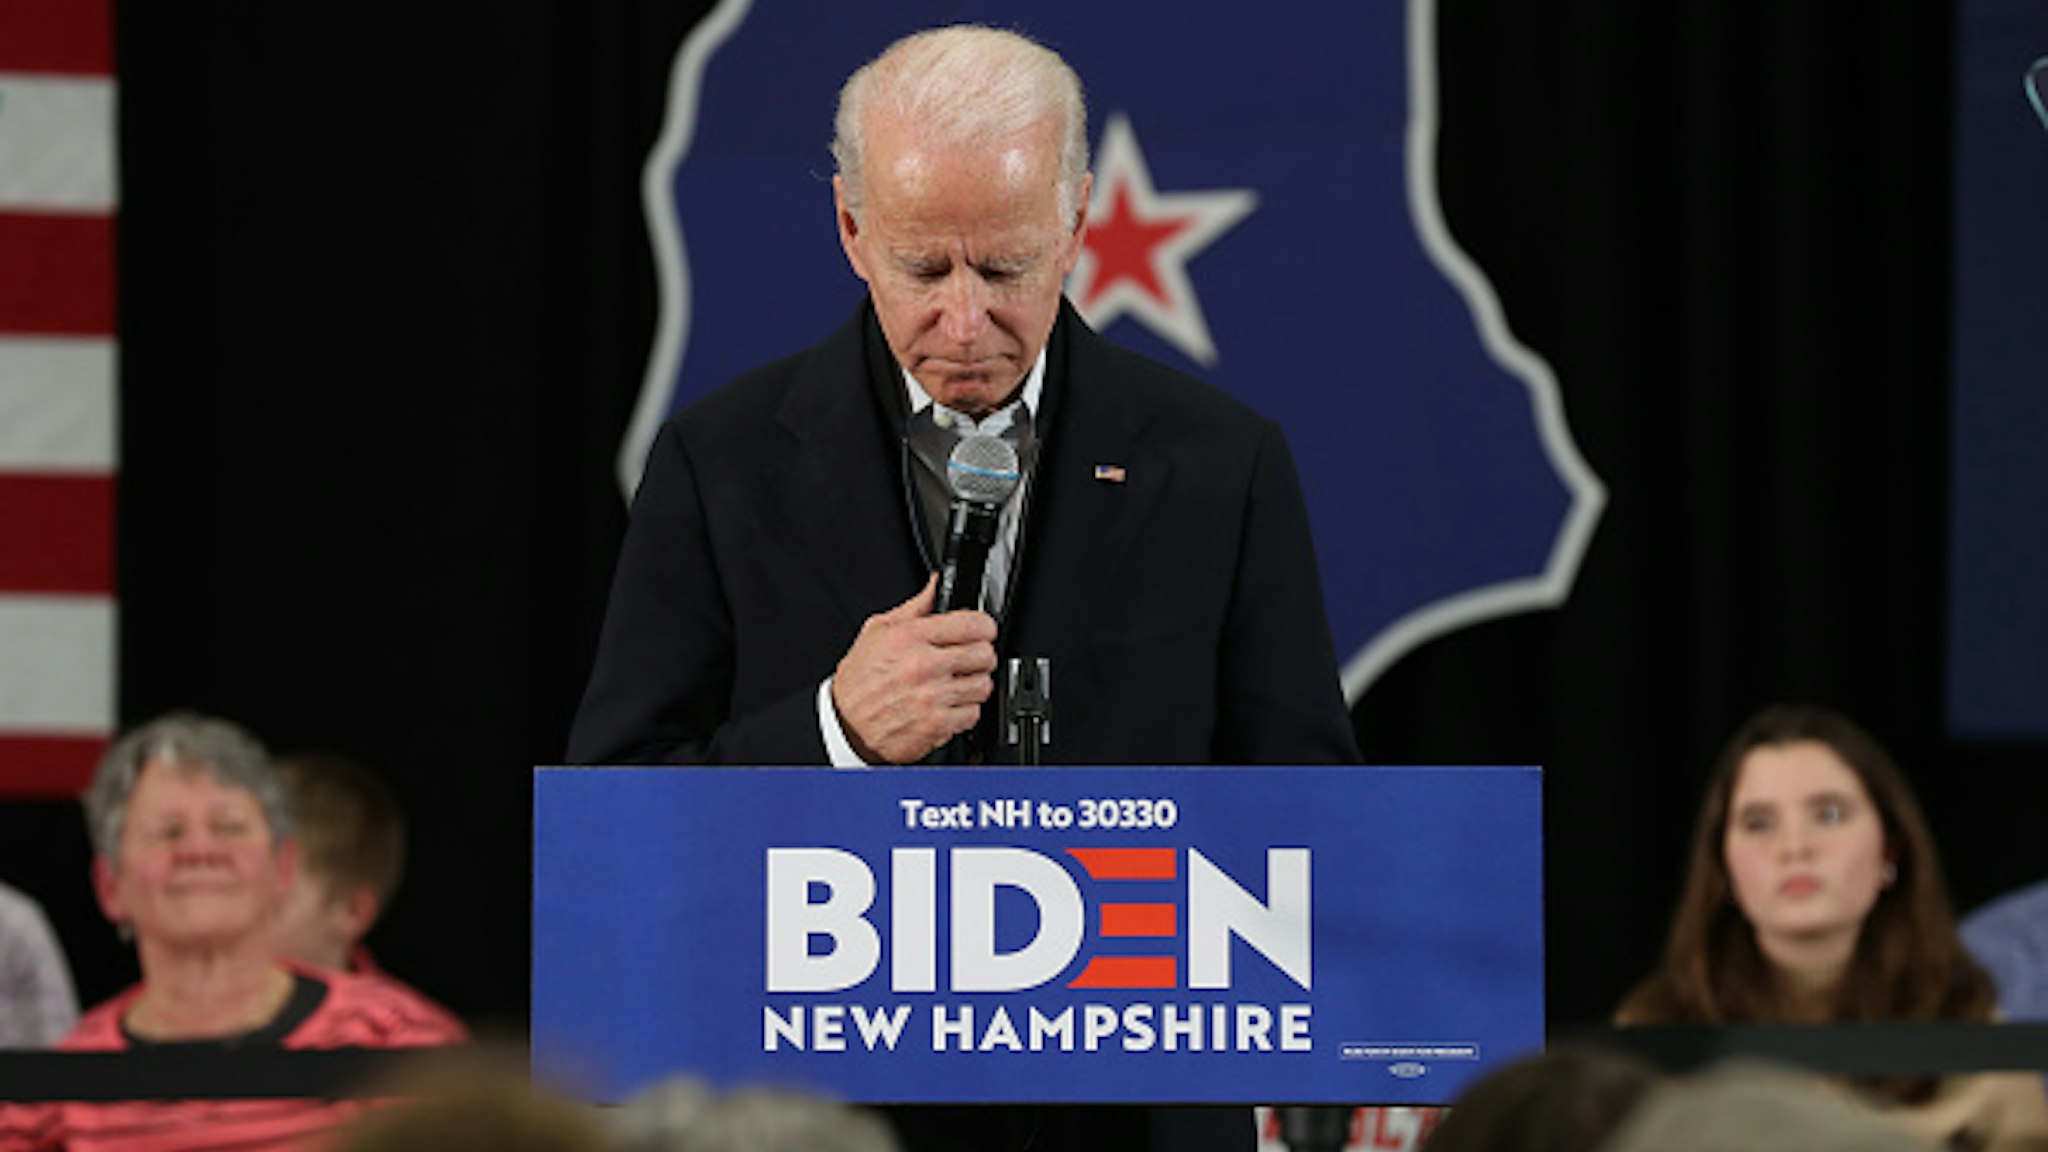 CONCORD, NEW HAMPSHIRE - FEBRUARY 04: Democratic presidential candidate former Vice President Joe Biden speaks during a campaign event on February 04, 2020 in Concord, New Hampshire. A day after the Iowa caucuses Joe Biden is campaigning in New Hampshire ahead of the state's primary on February 11.